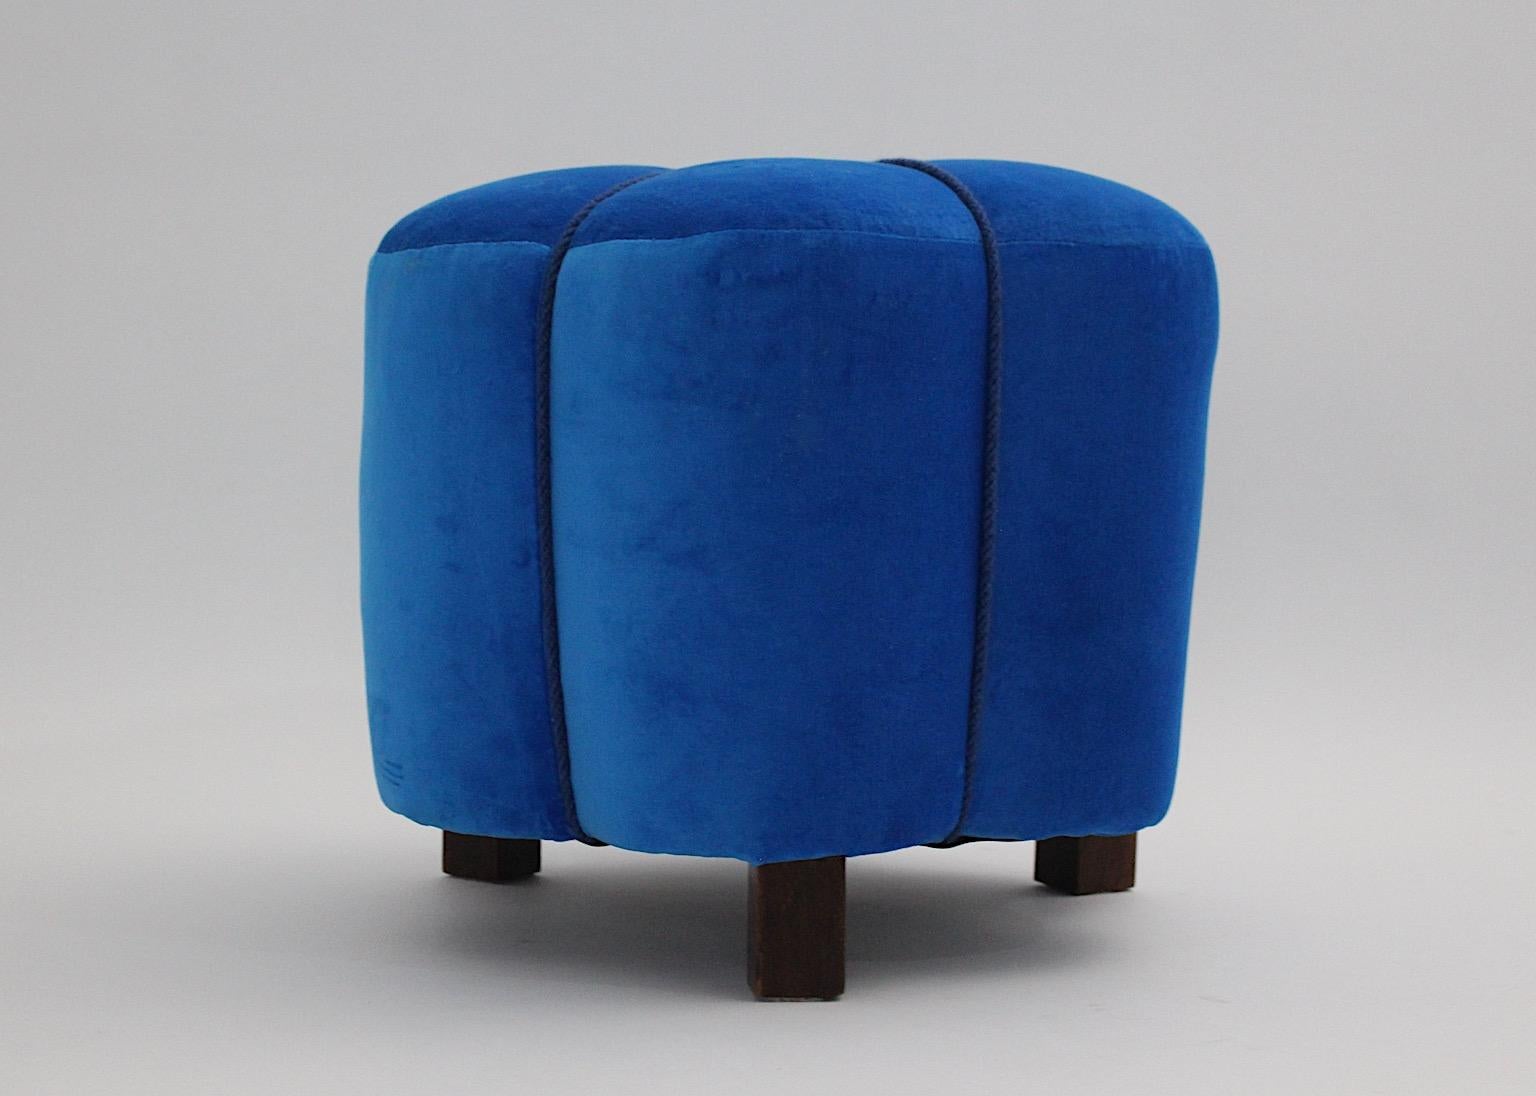 Art Deco vintage pouf or stool stellar like with beech feet and blue velvet fabric cover, 1930s Austria.
A stunning and joyful Art Deco pouf features new hand made electric blue velvet fabric cover and blue cords in similar blue tone. 
Three brown